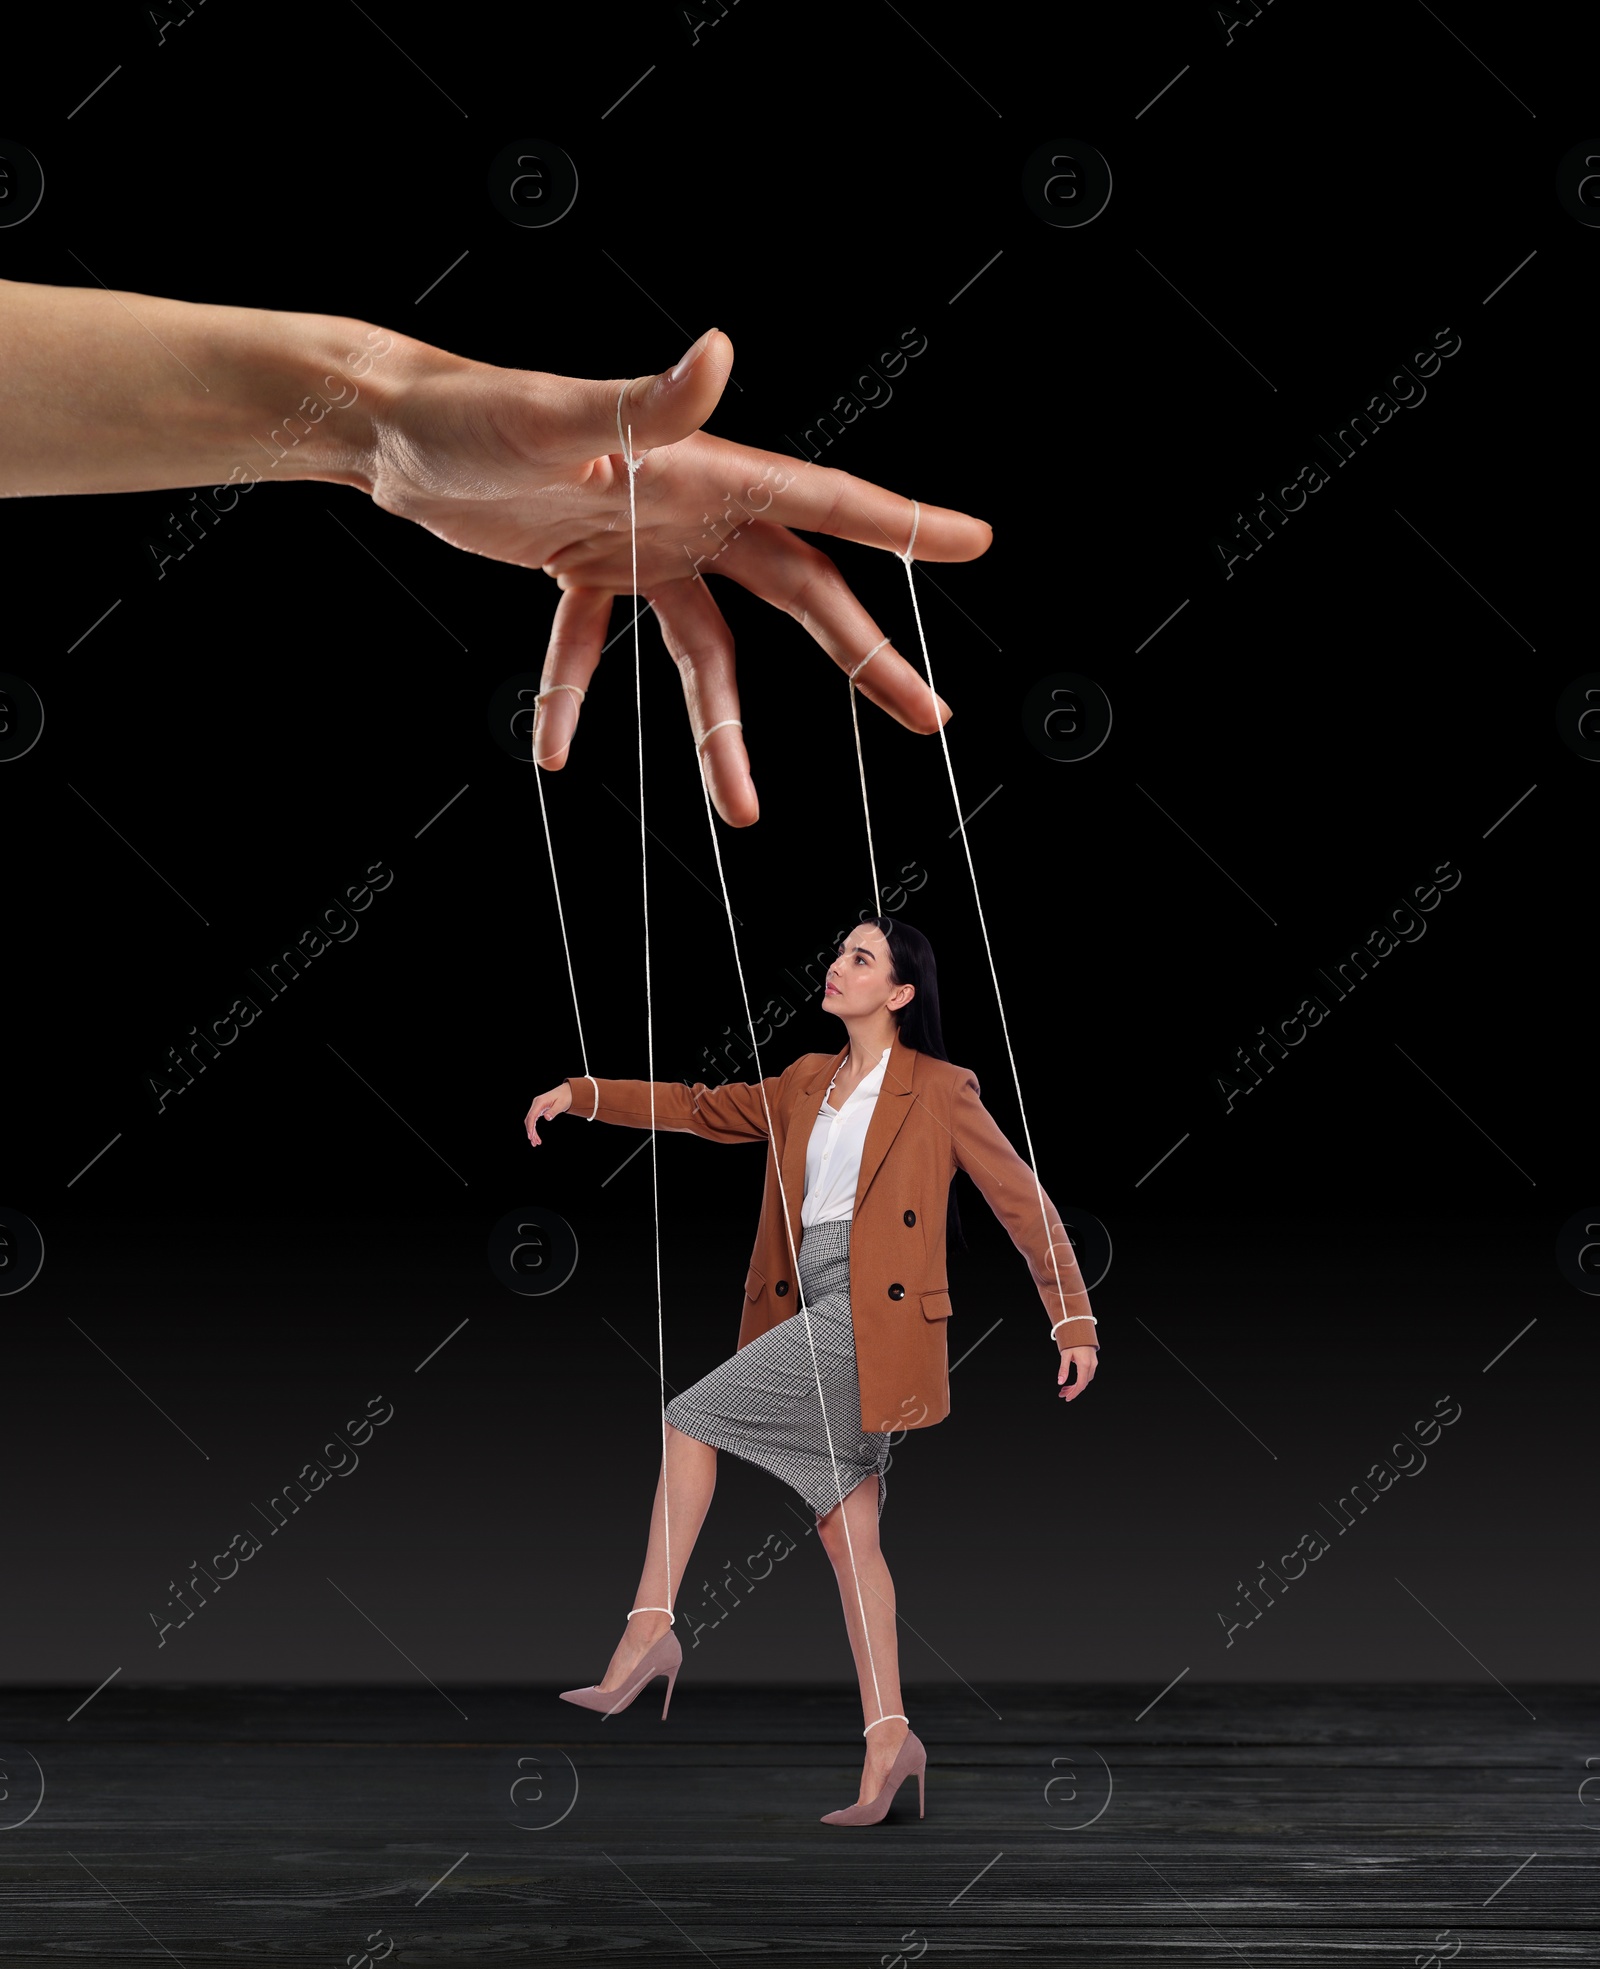 Image of Human relationships demonstrated in puppet show. Worker manipulated by director or manager on black background